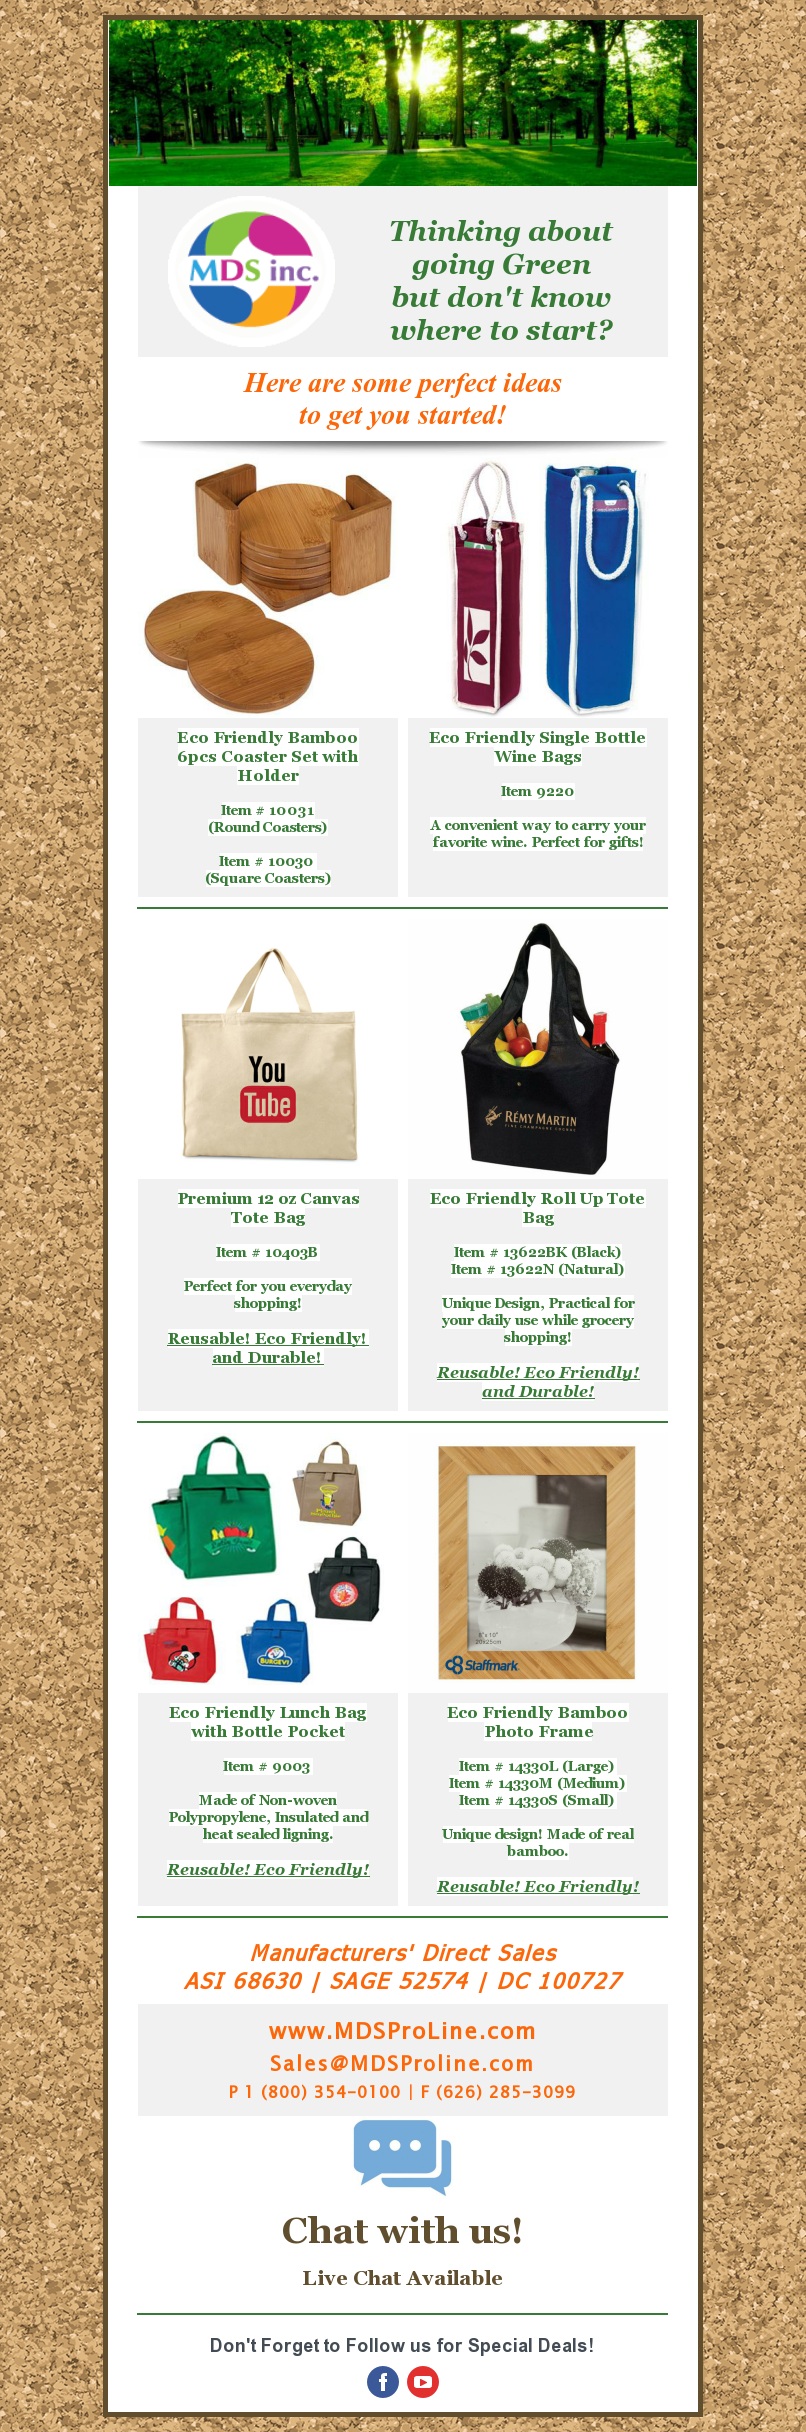 Thinking about going Eco-Friendly? Check out our new products!